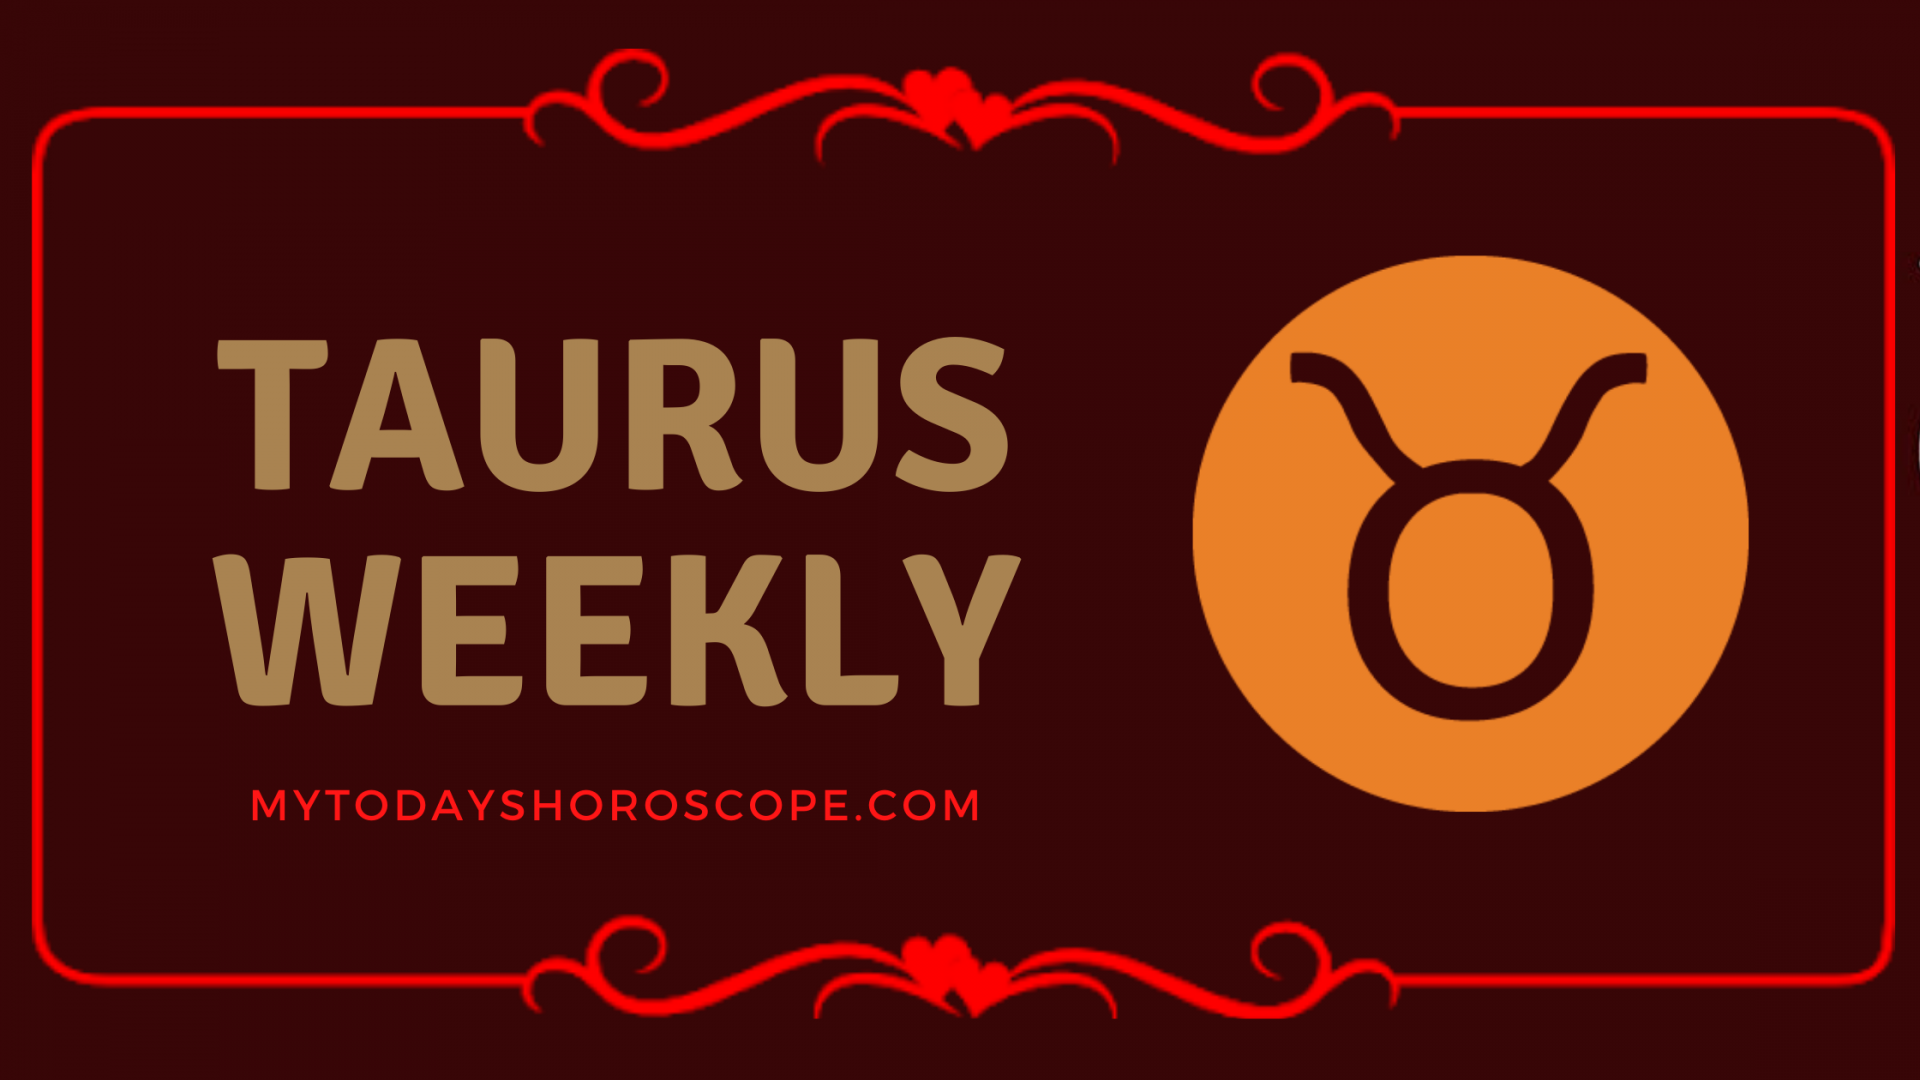 Taurus Weekly Horoscope (April 19 - 25): Predictions for Love, Financial, Career and Health